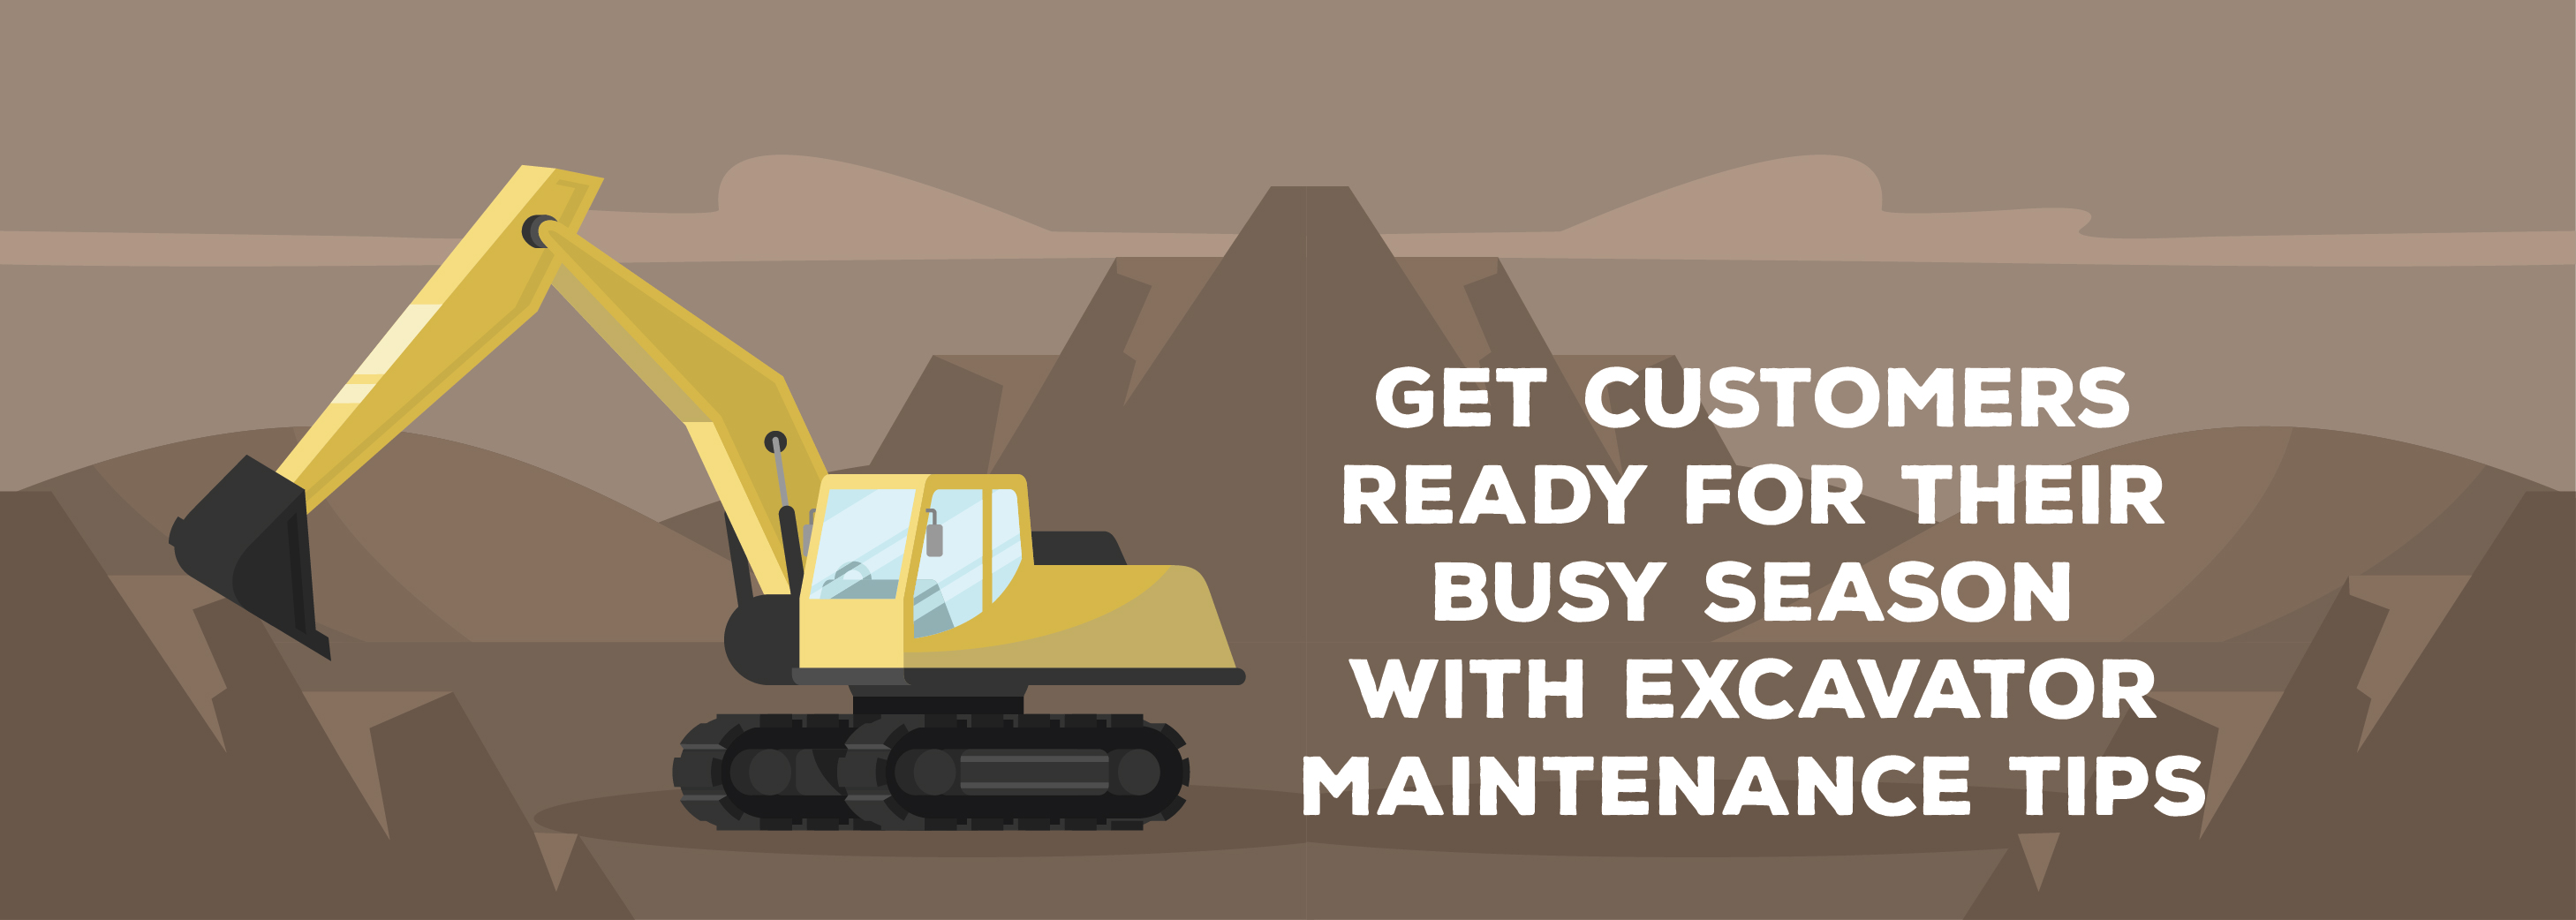 Get Customers Ready For Their Busy Season With Excavator Maintenance Tips | ADI Agency